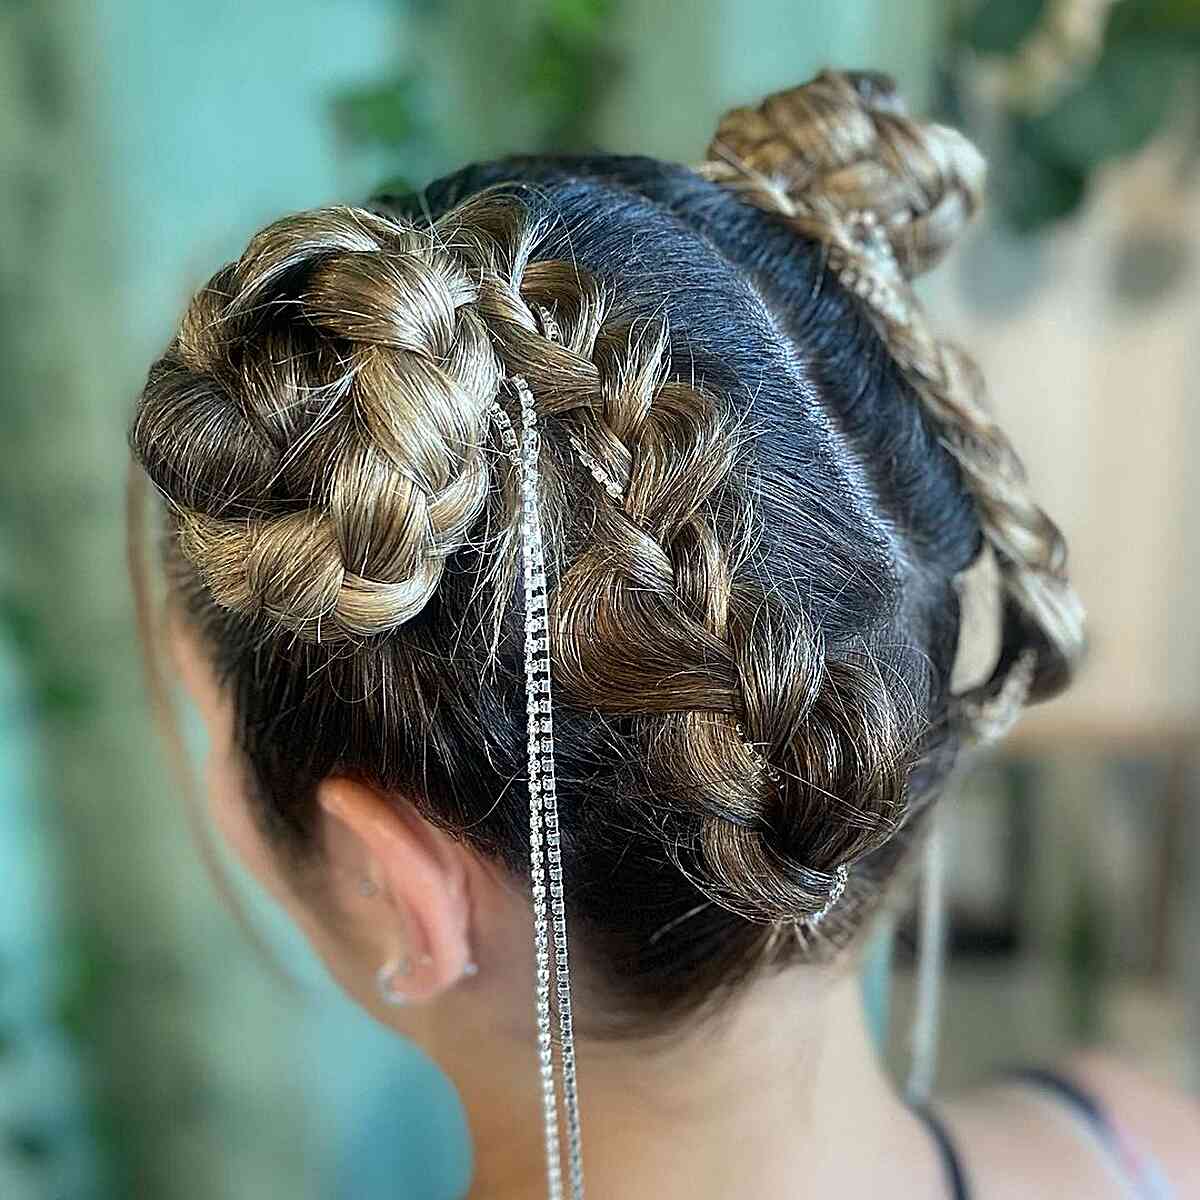 Braided Buns with Accessory for a Festival